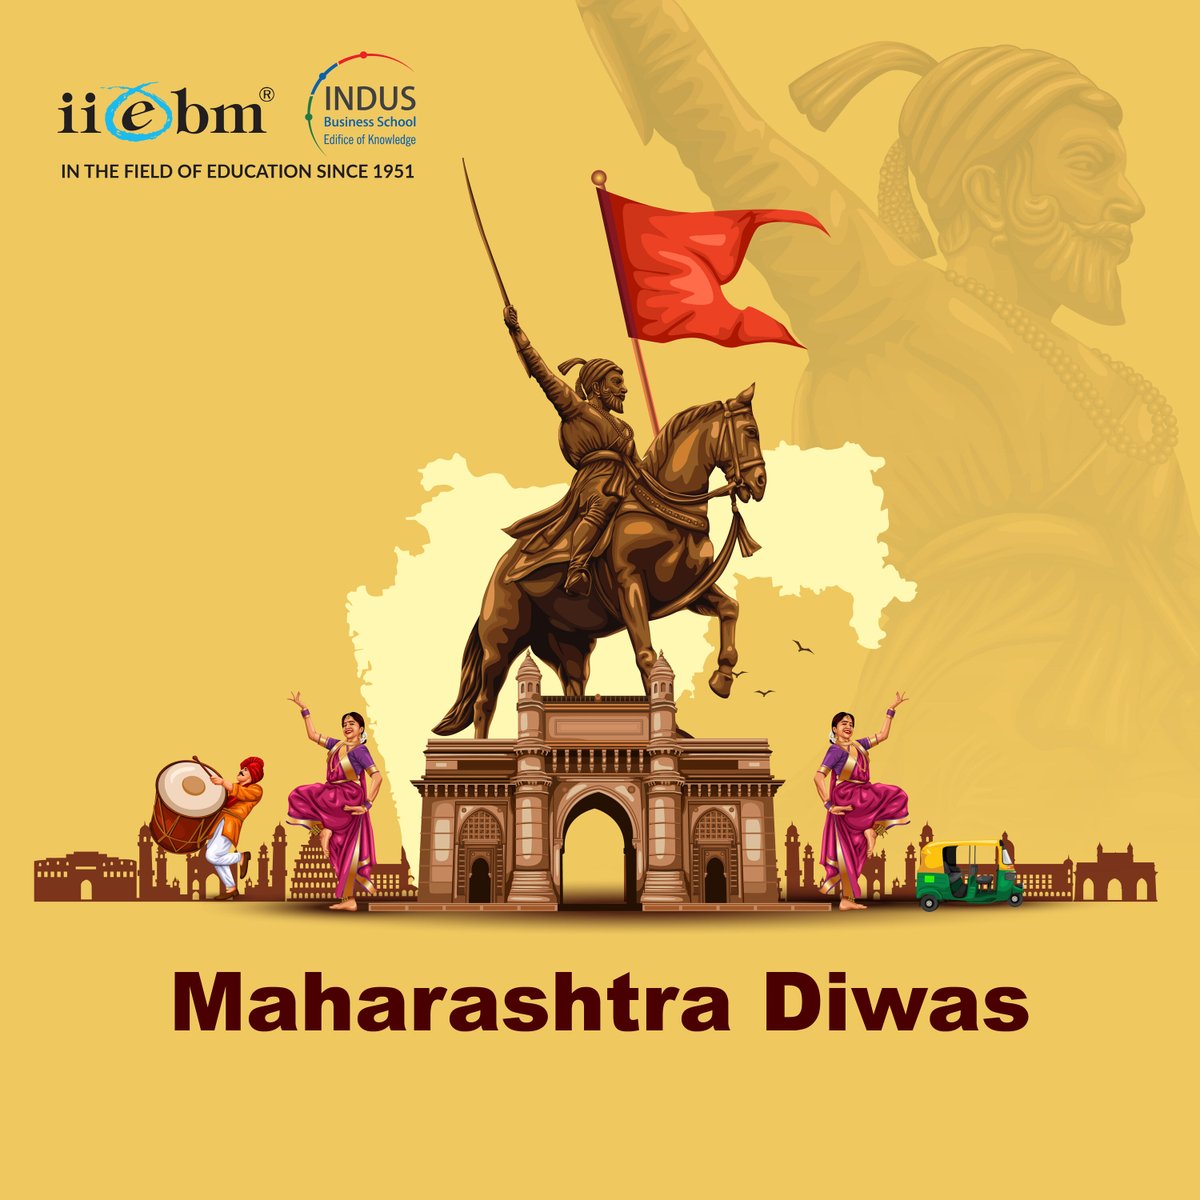 Celebrating the spirit of Maharashtra Diwas with the future leaders at IIEBM. Here's to the land that inspires us to blend tradition with innovation in management education. 🌟
#MaharashtraDiwas #ManagementEducation #LeadersOfTomorrow#MBA #PGDM #Education #IIEBM #IIEBMPune